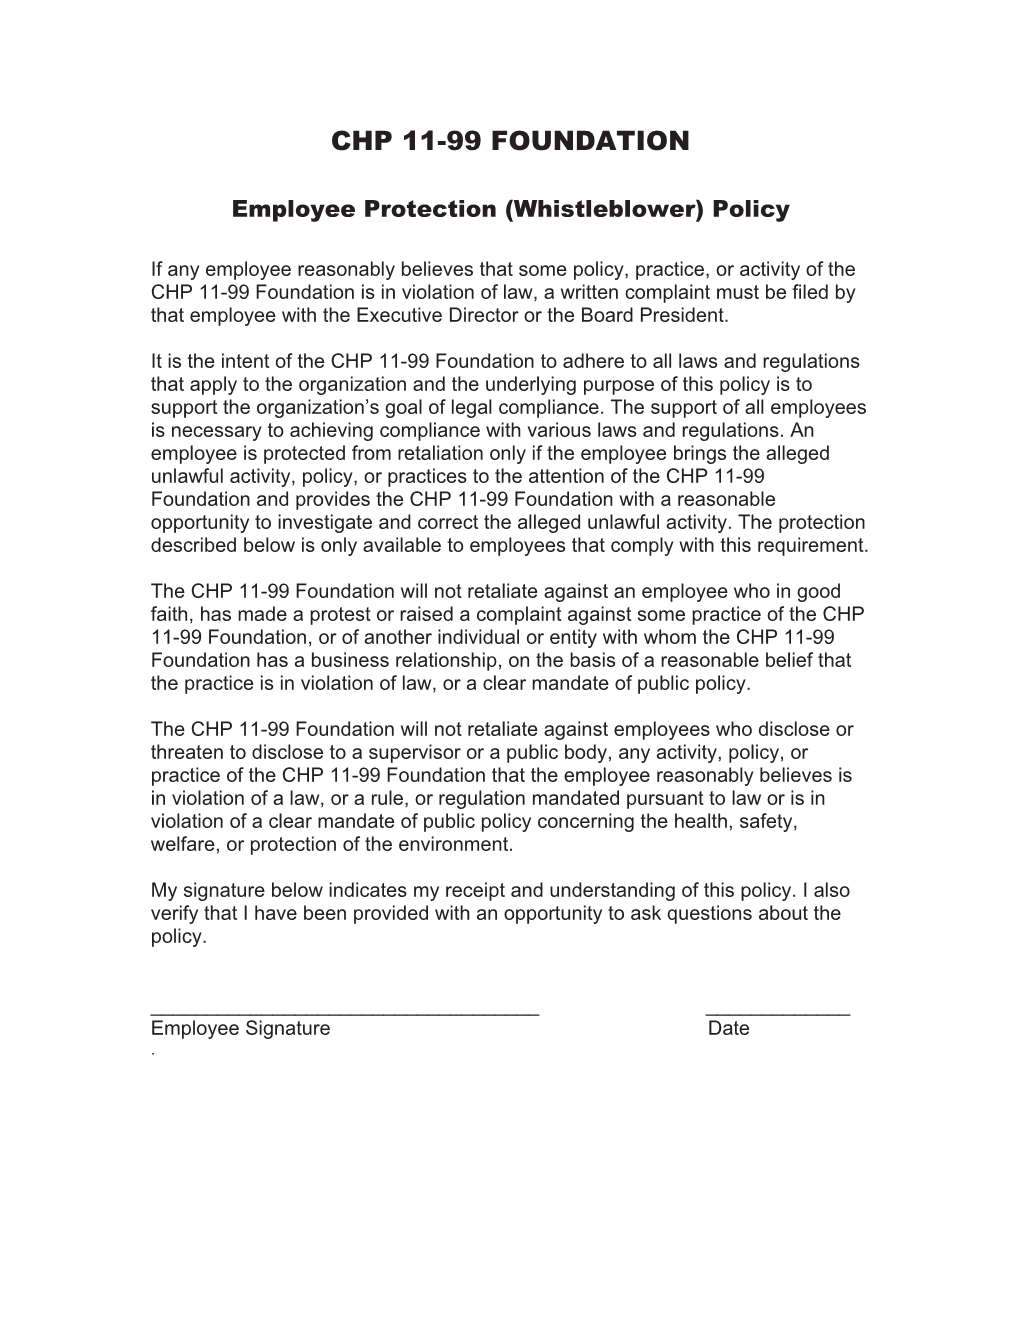 Employee Protection (Whistleblower) Policy